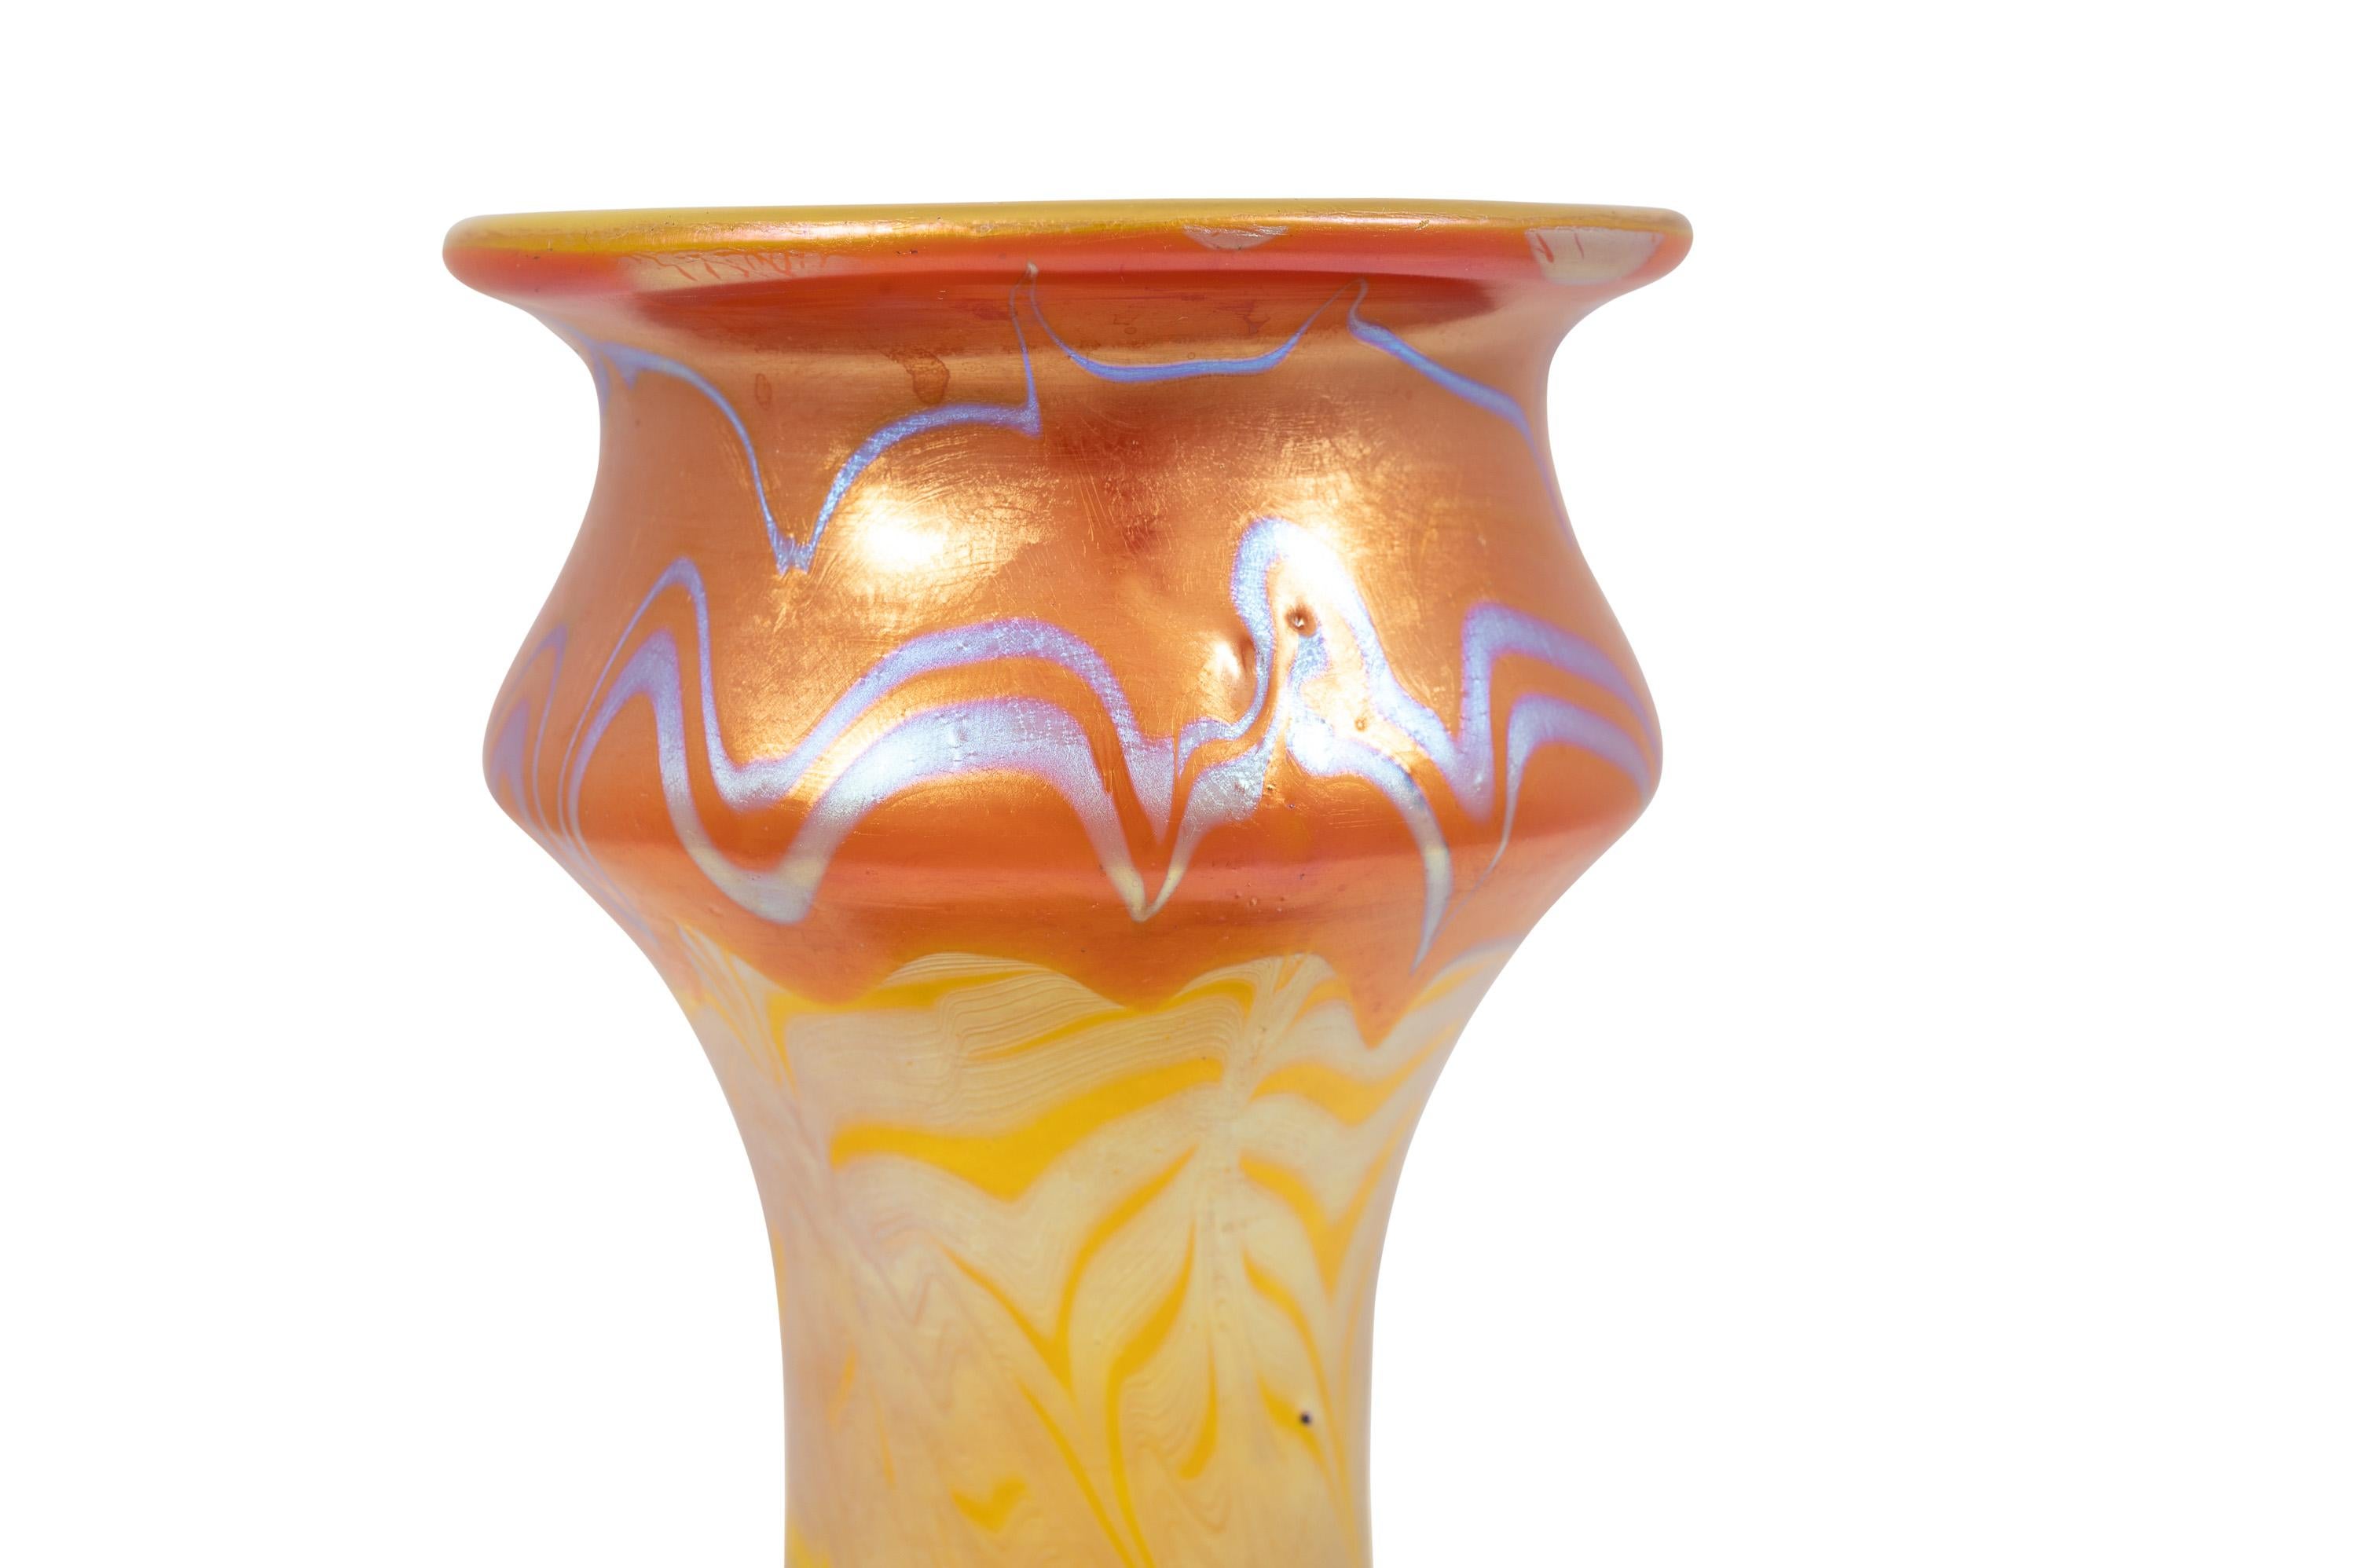 Bohemian Glass Vase Loetz PG 358 circa 1900 Art Nouveau In Good Condition For Sale In Klosterneuburg, AT